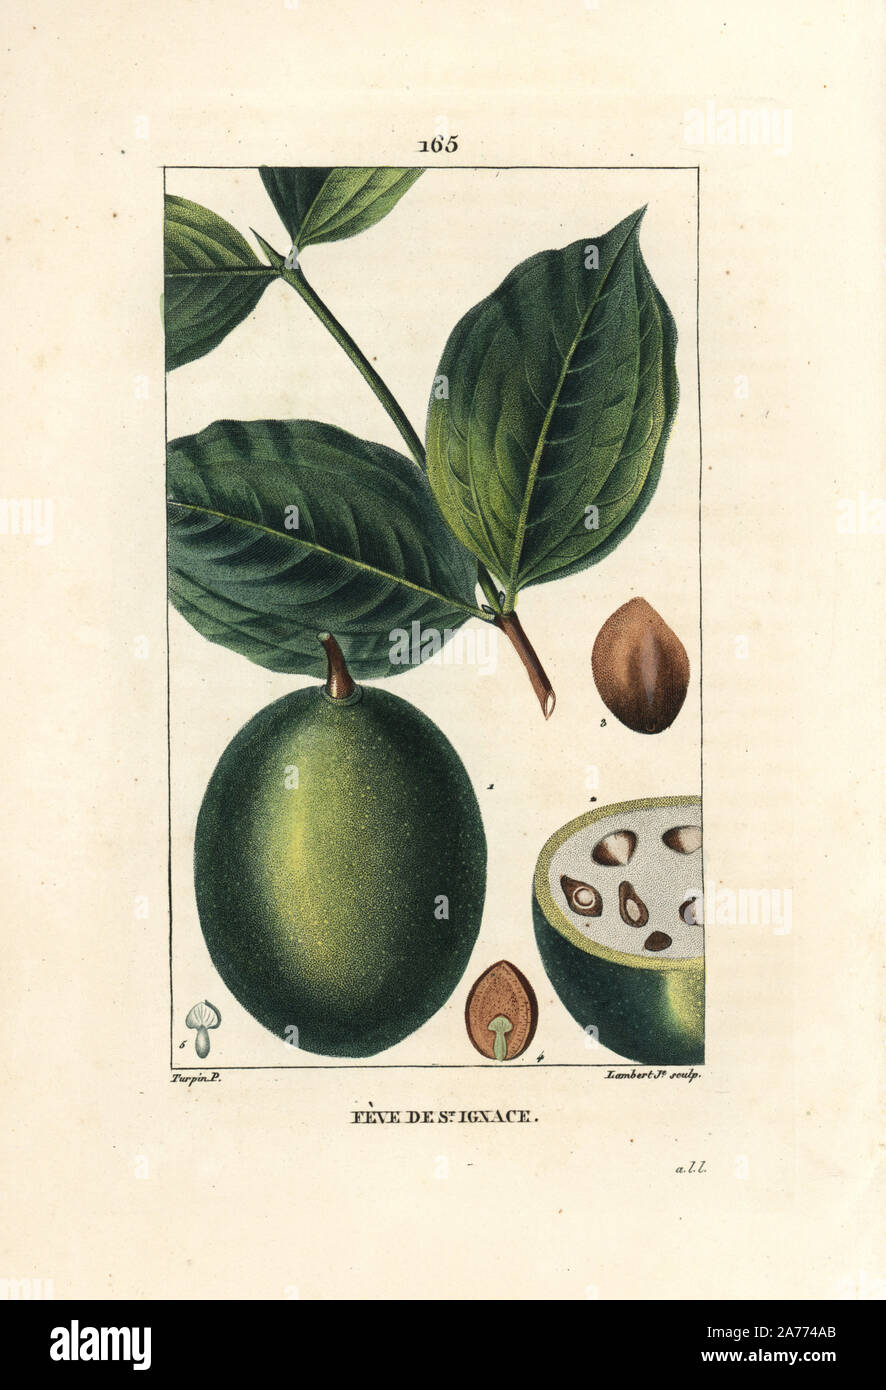 Jesuit's bean or St. Ignatia's bean, Strychnos ignatia, showing fruit and seeds (beans), whole and in section. Handcoloured stipple copperplate engraving by Lambert Junior from a drawing by Pierre Jean-Francois Turpin from Chaumeton, Poiret et Chamberet's 'La Flore Medicale,' Paris, Panckoucke, 1830. Turpin (17751840) was one of the three giants of French botanical art of the era alongside Pierre Joseph Redoute and Pancrace Bessa. Stock Photo